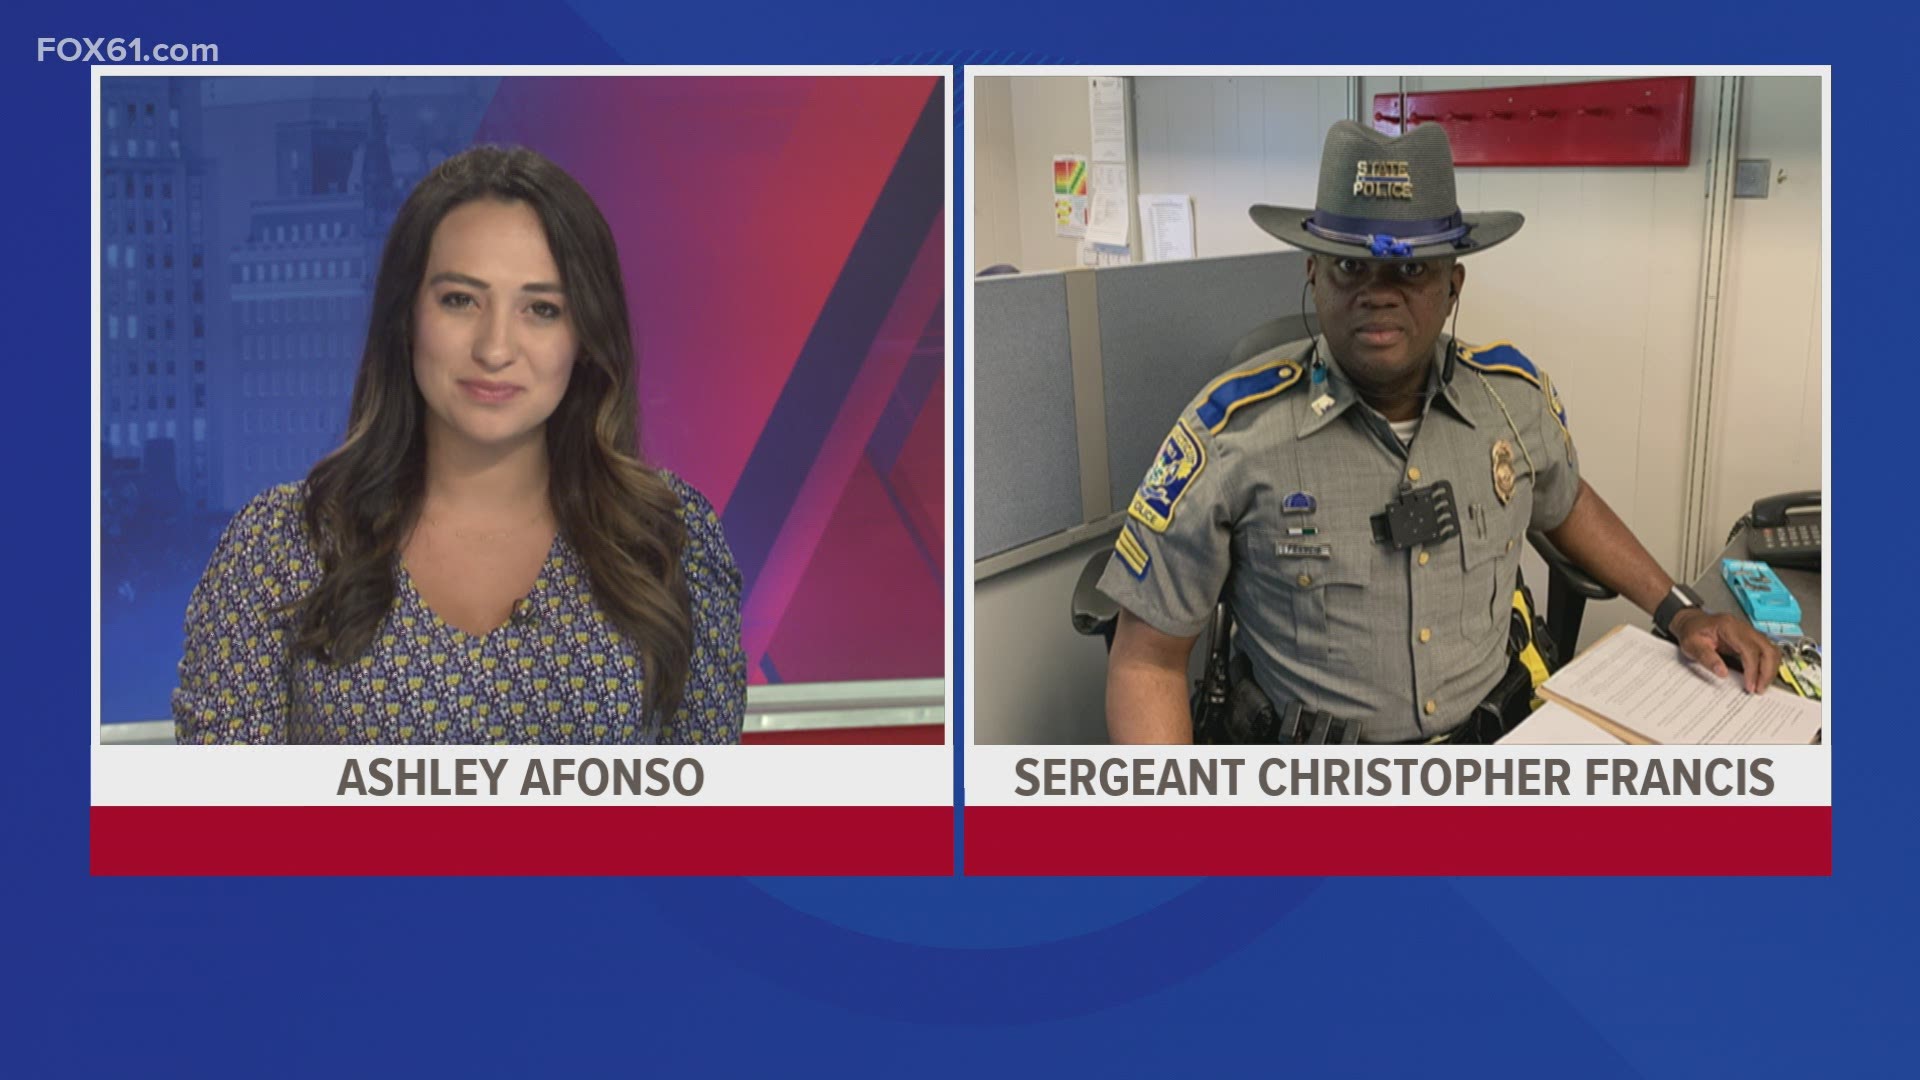 State police Sgt. Christopher Francis spoke about the lines for applicants